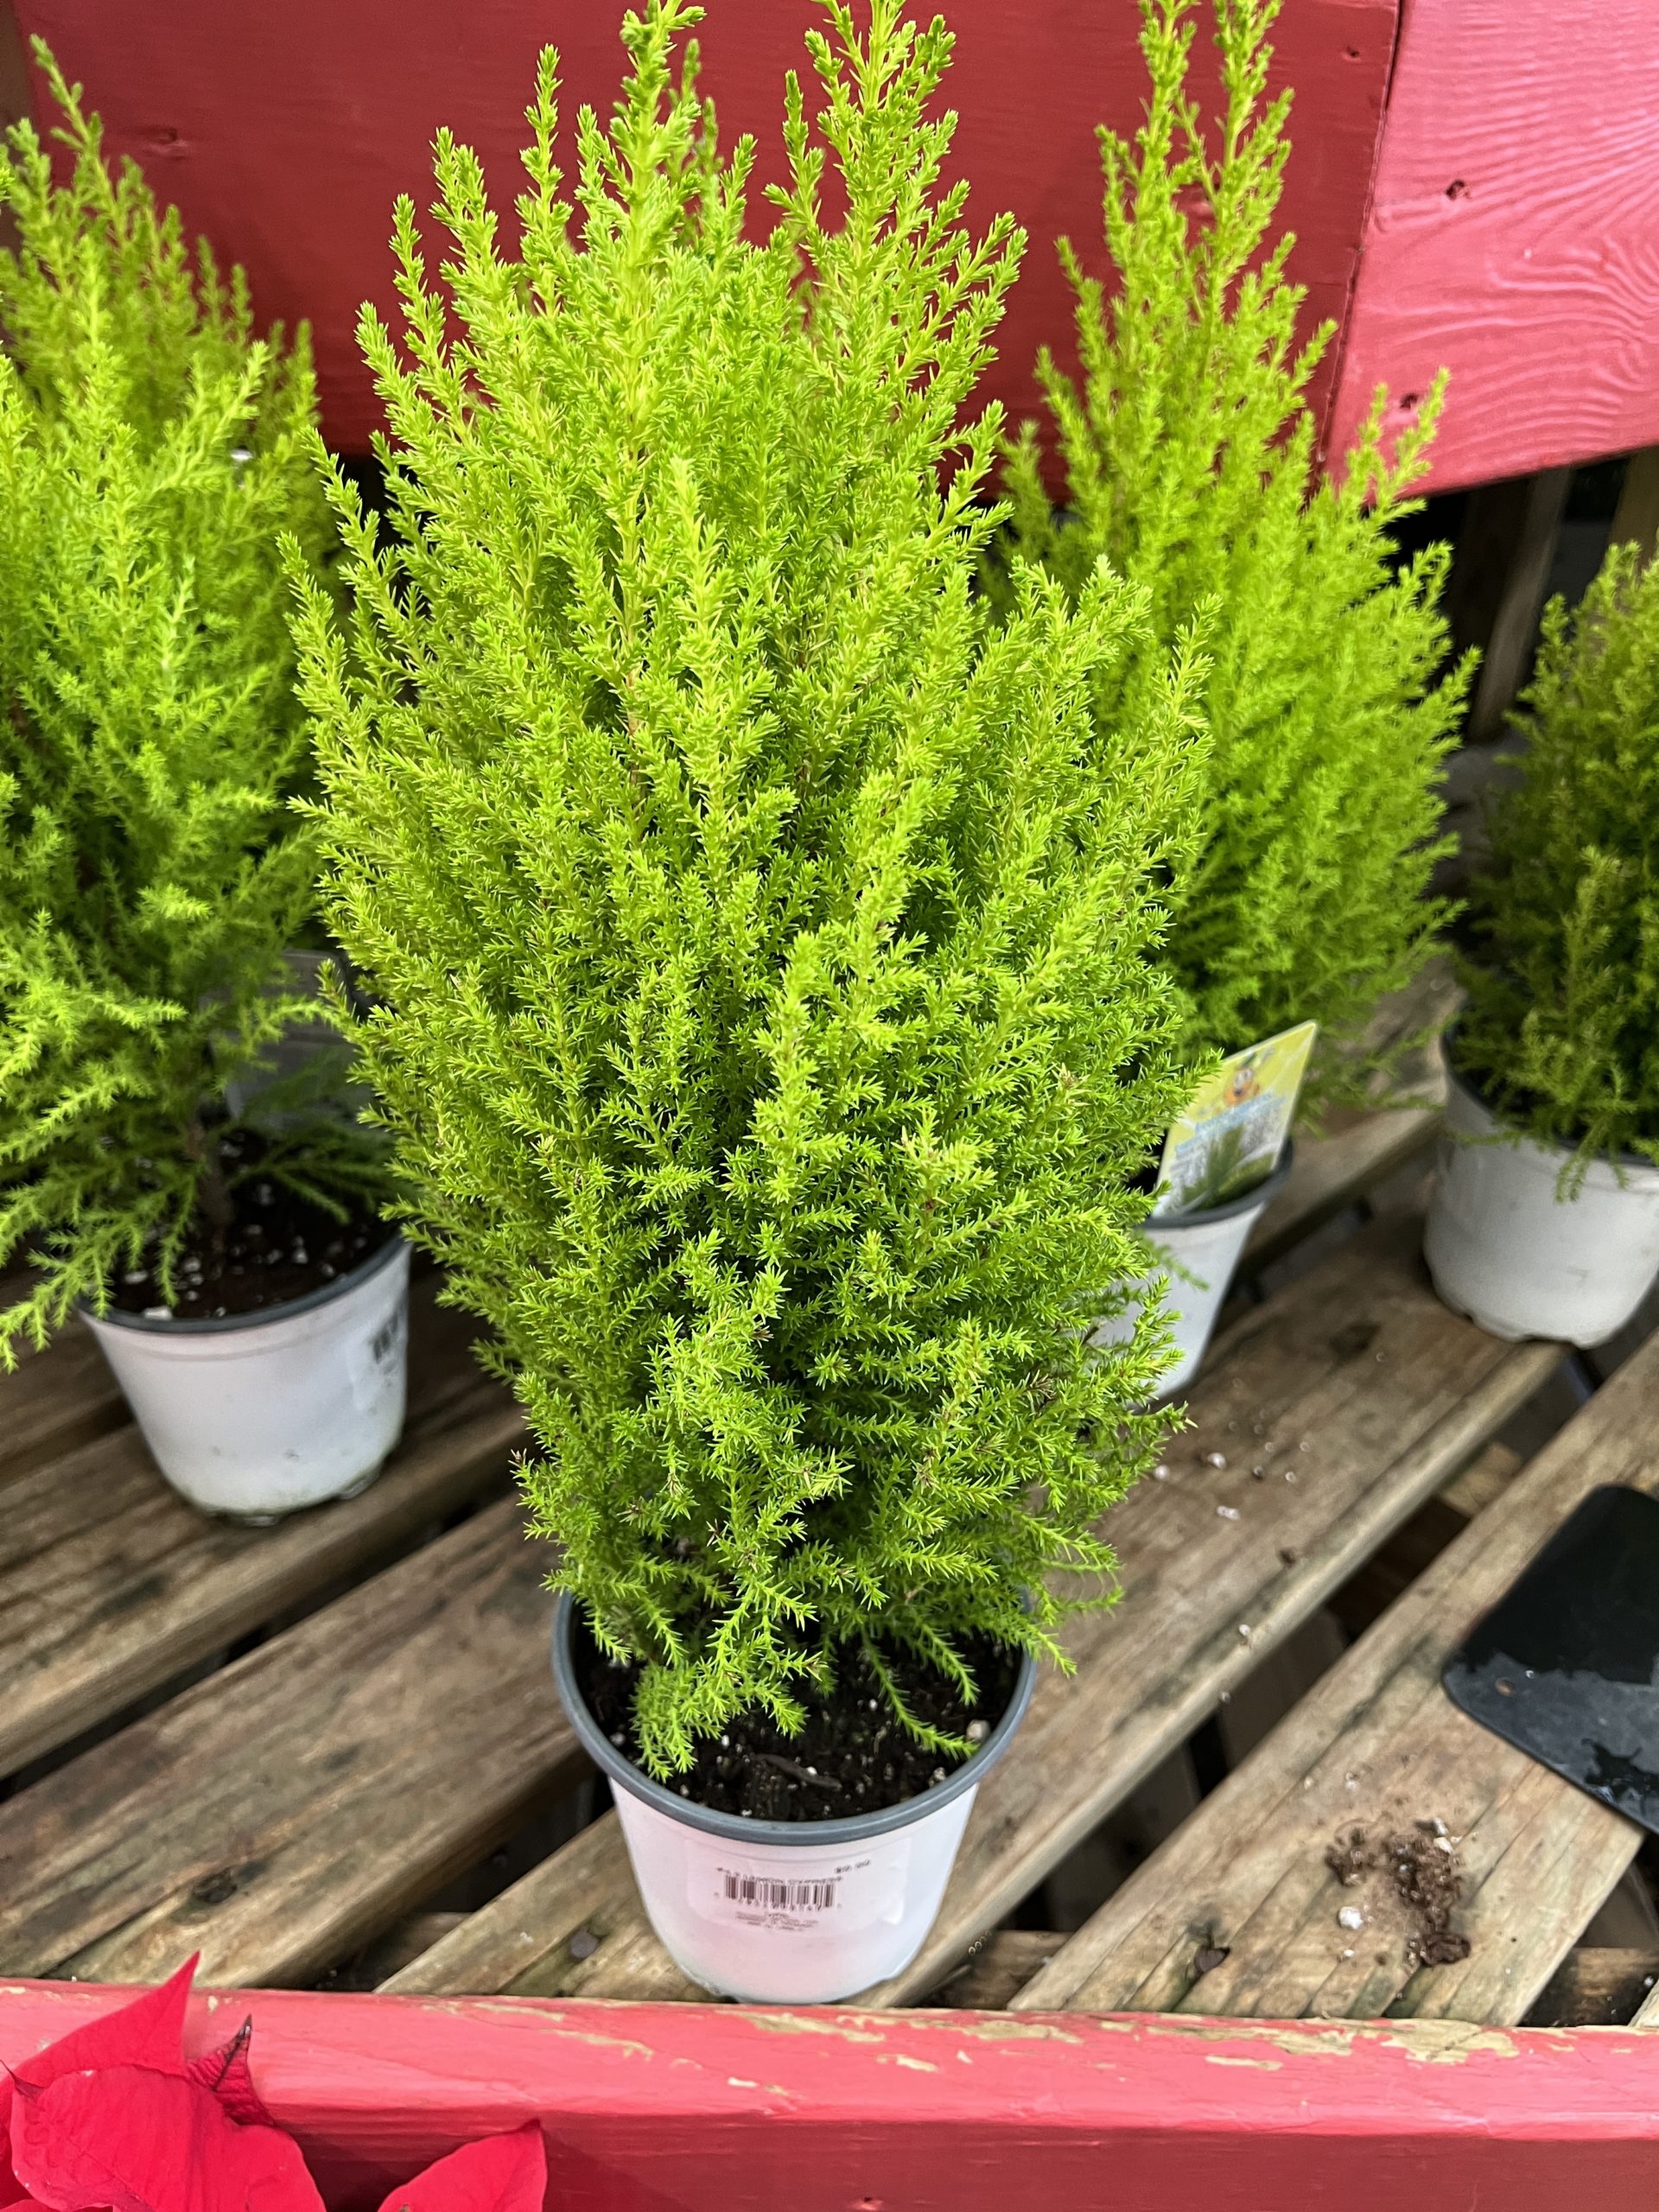 This Lemon cypress, native to some Western states, has been carefully clipped over several months and sold in 4- to 6-inch pots for holiday decoration.